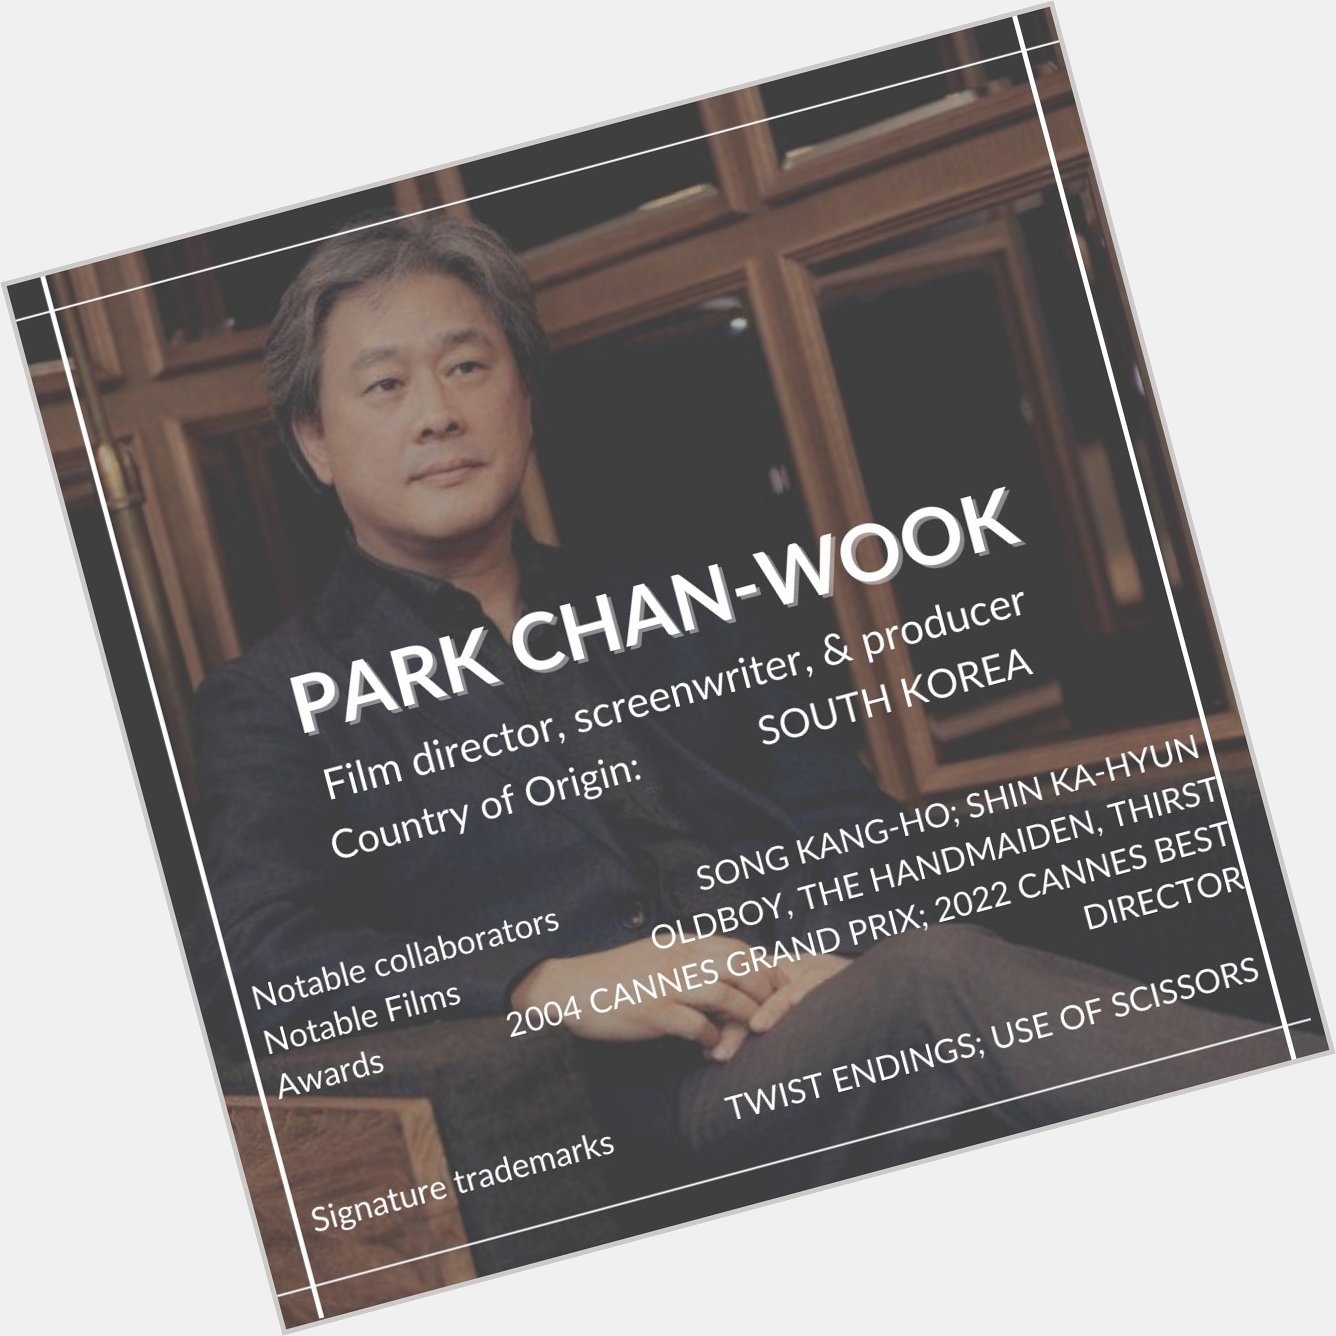 Happy birthday to Park Chan-wook! 